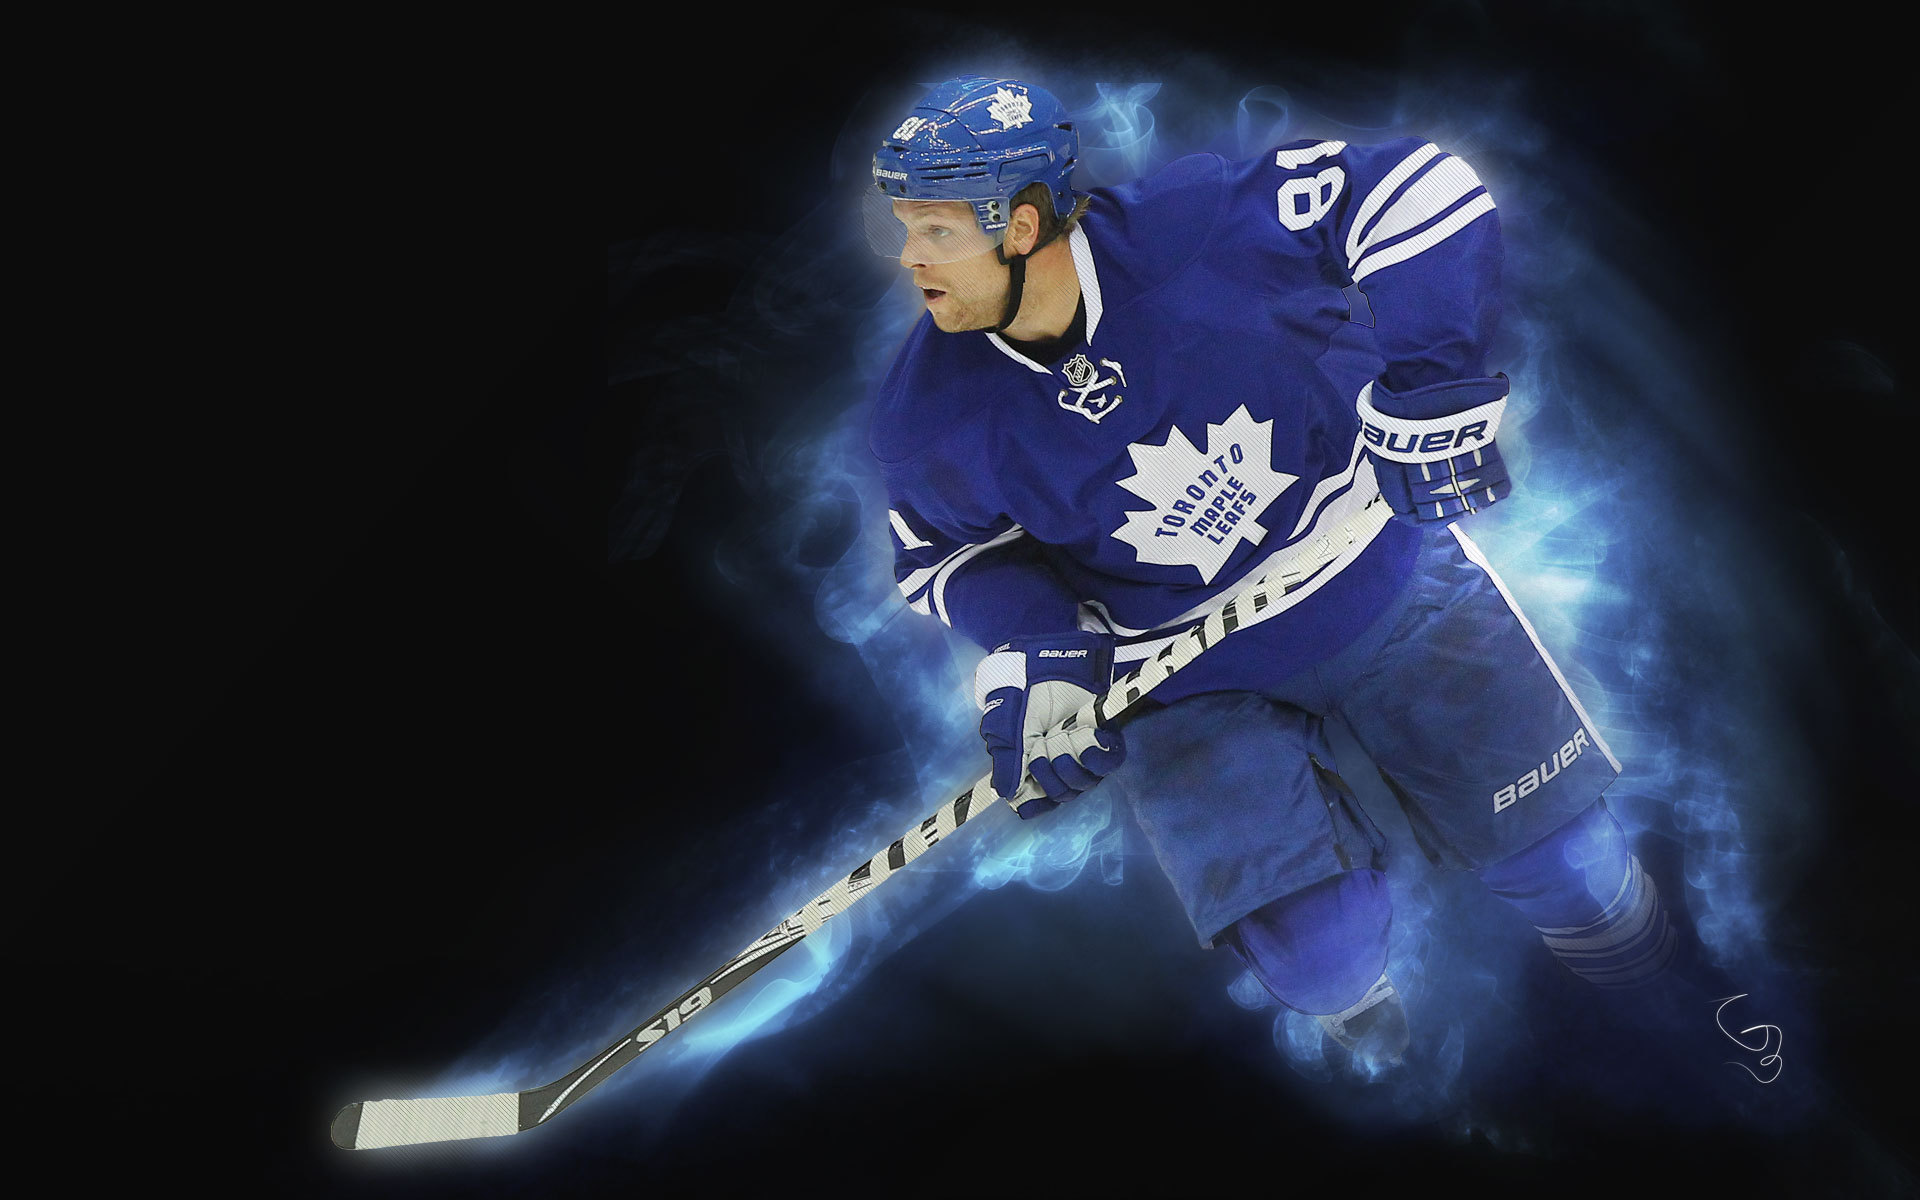 Famous Hockey player Toronto Phil Kessel wallpapers and images